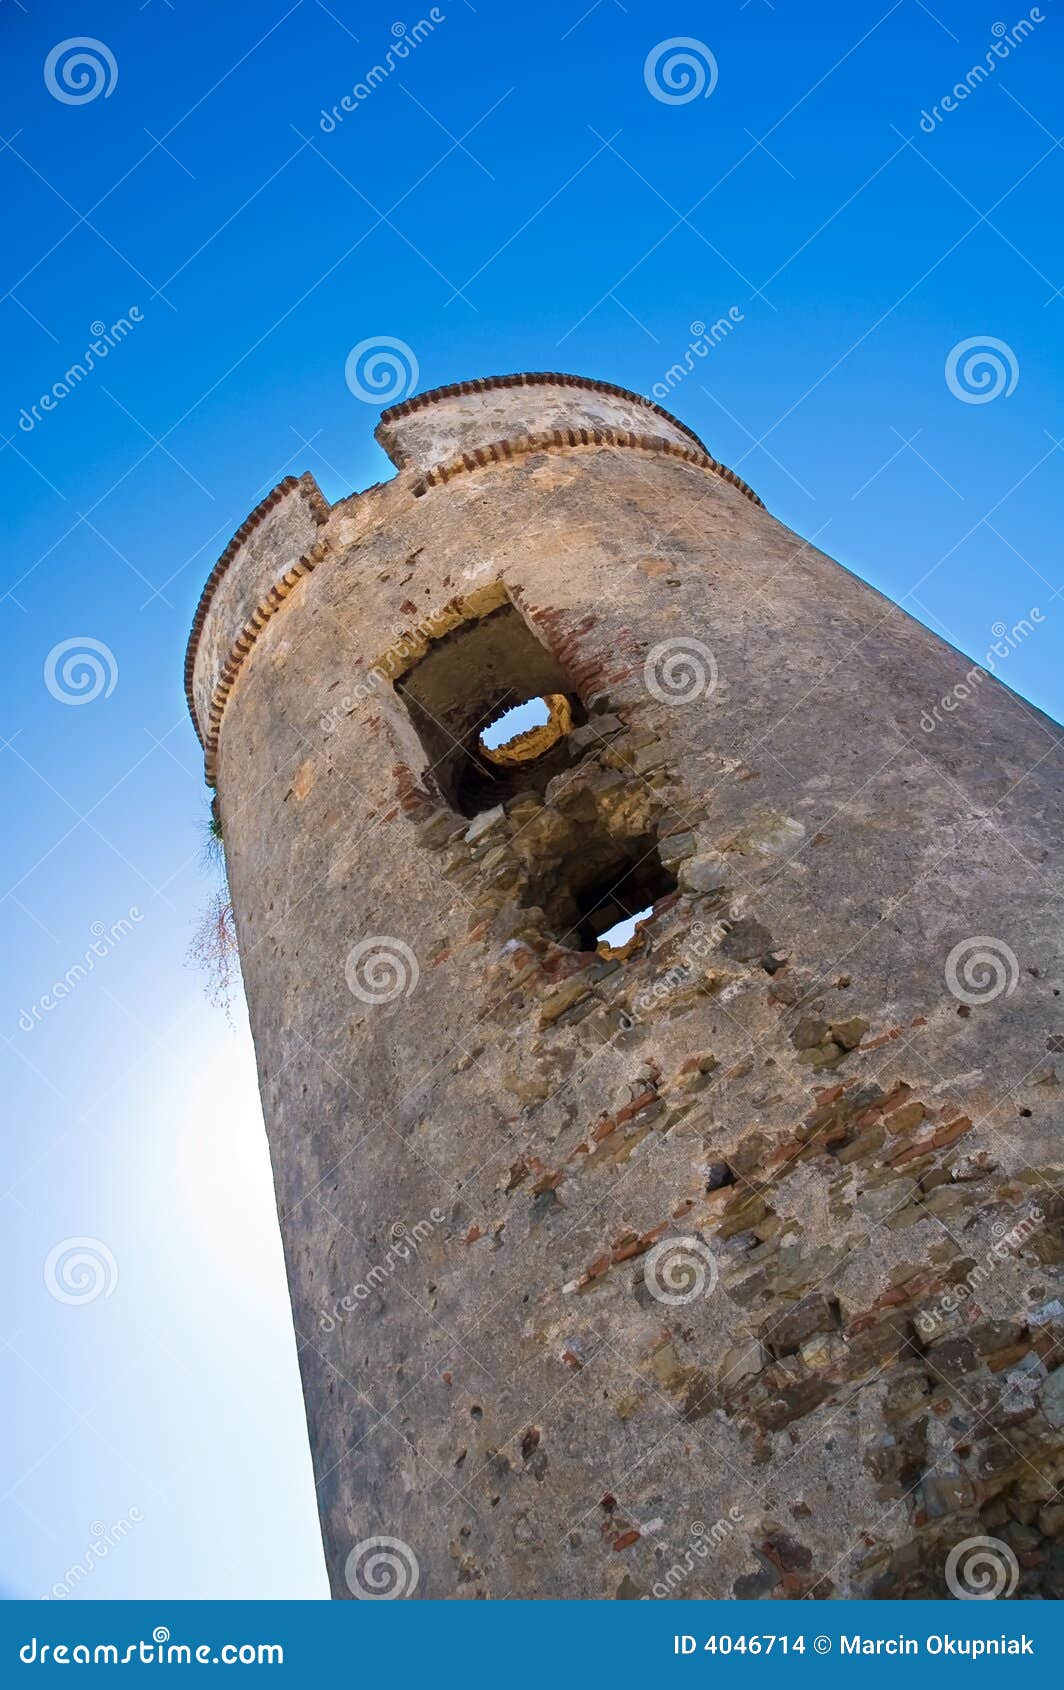 defensive tower with sun behind